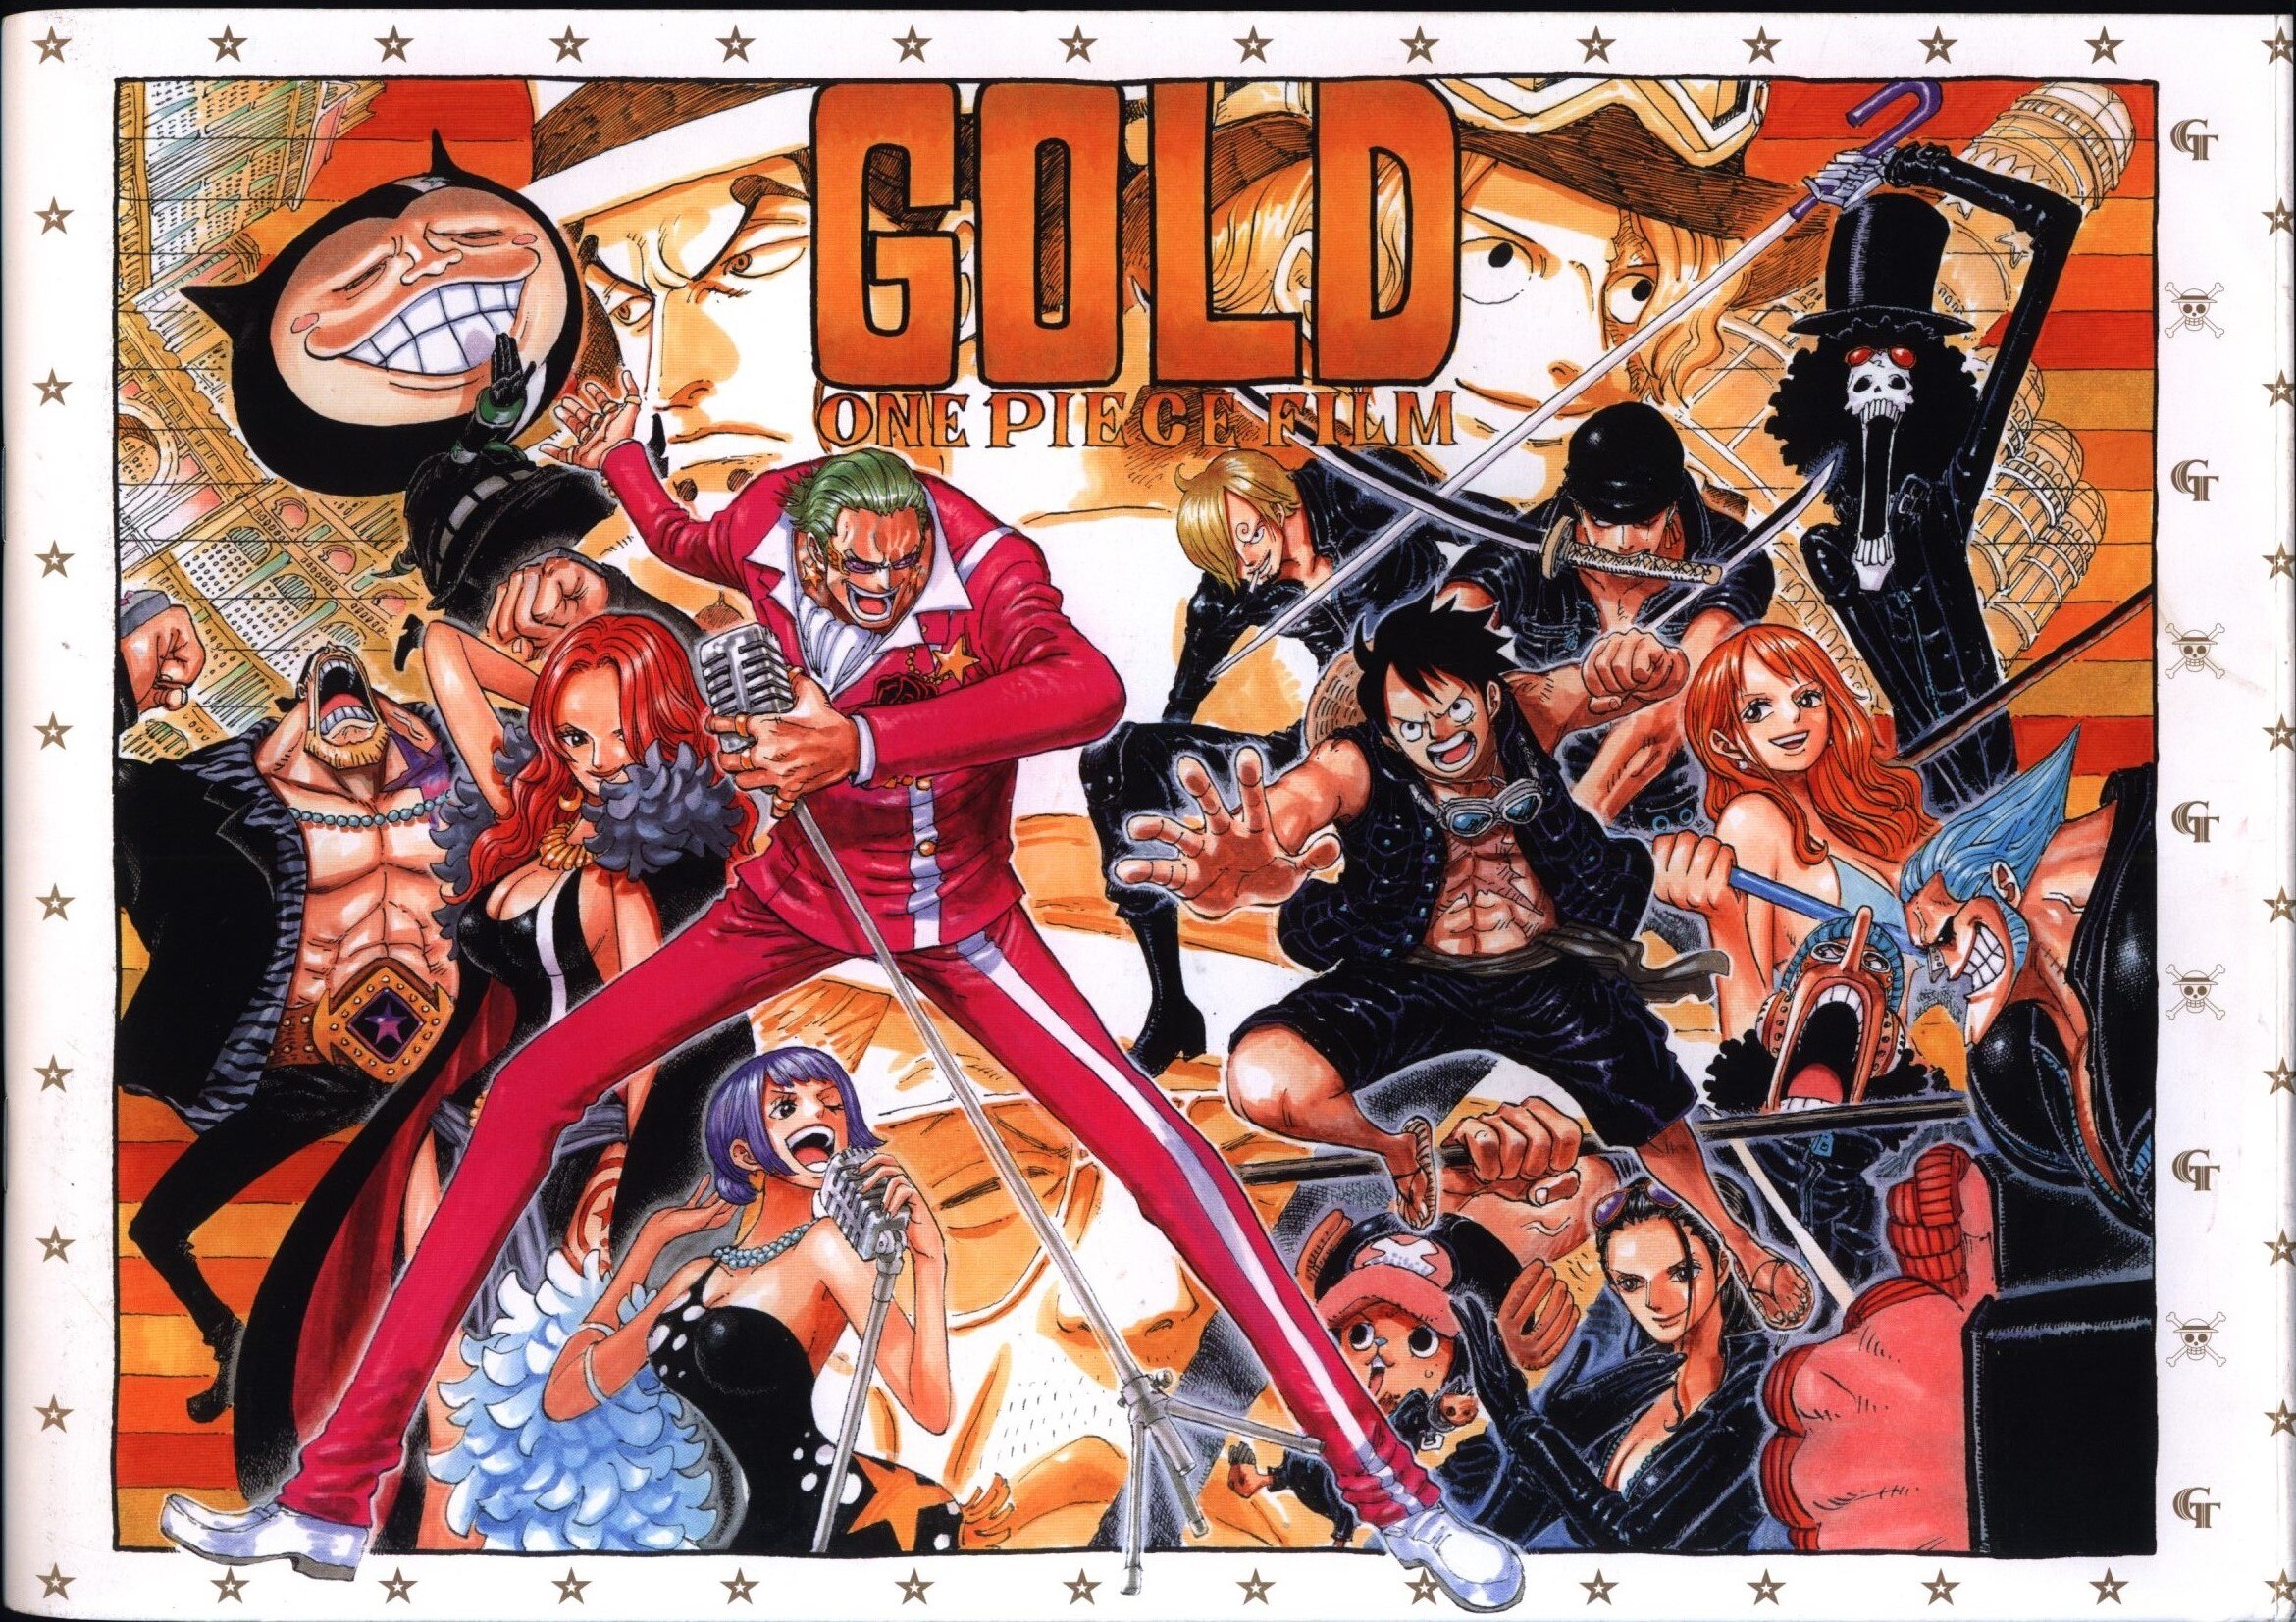 One Piece Film: Gold Pamphlet